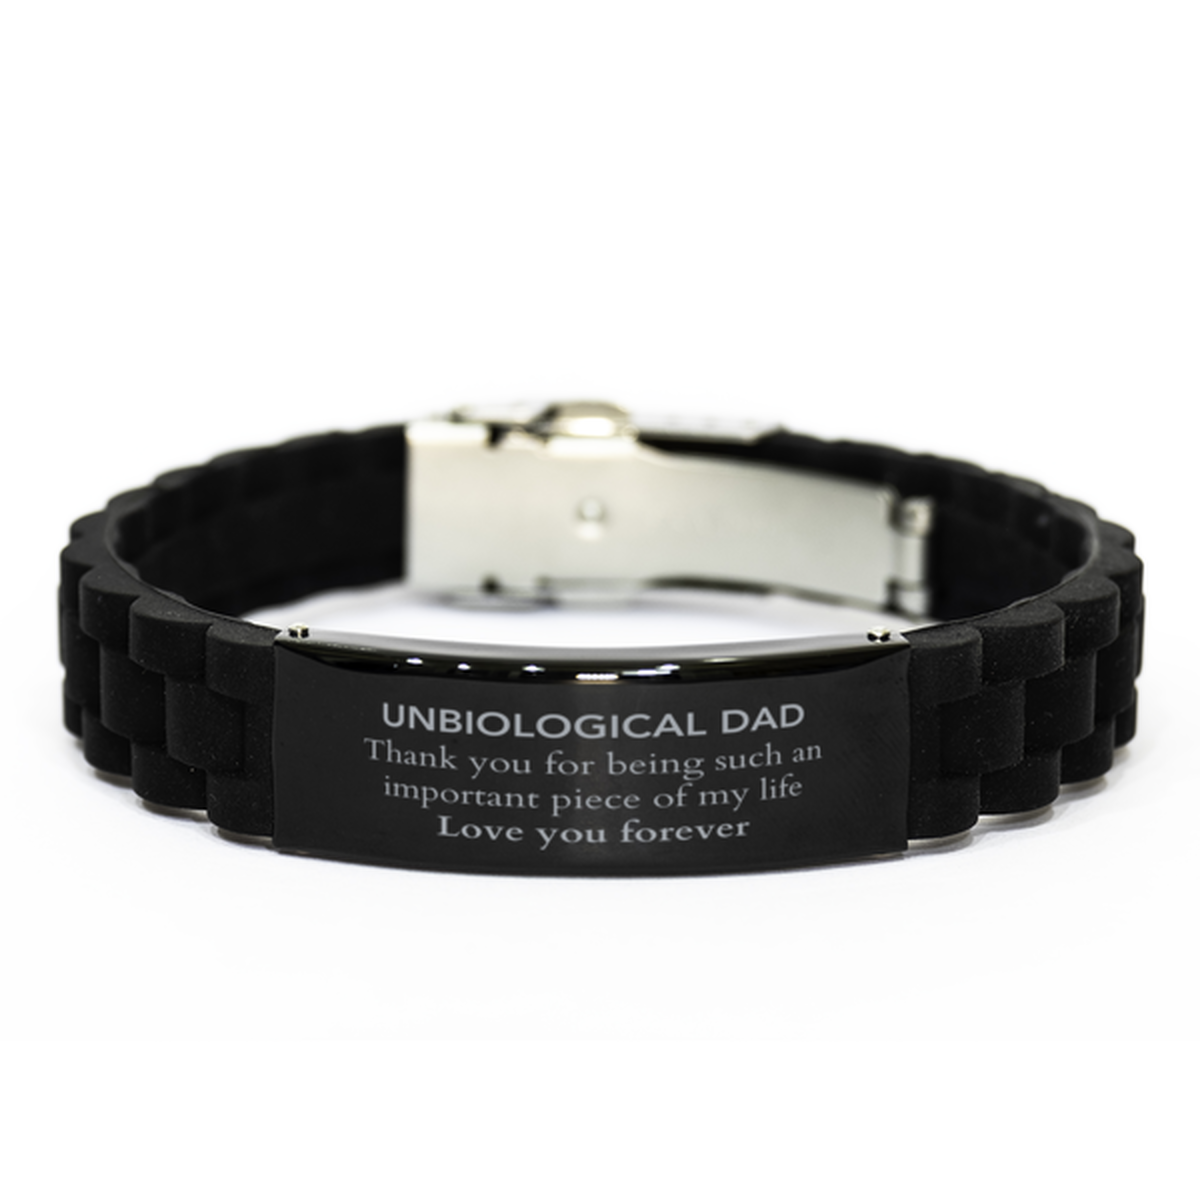 Appropriate Unbiological Dad Black Glidelock Clasp Bracelet Epic Birthday Gifts for Unbiological Dad Thank you for being such an important piece of my life Unbiological Dad Christmas Mothers Fathers Day